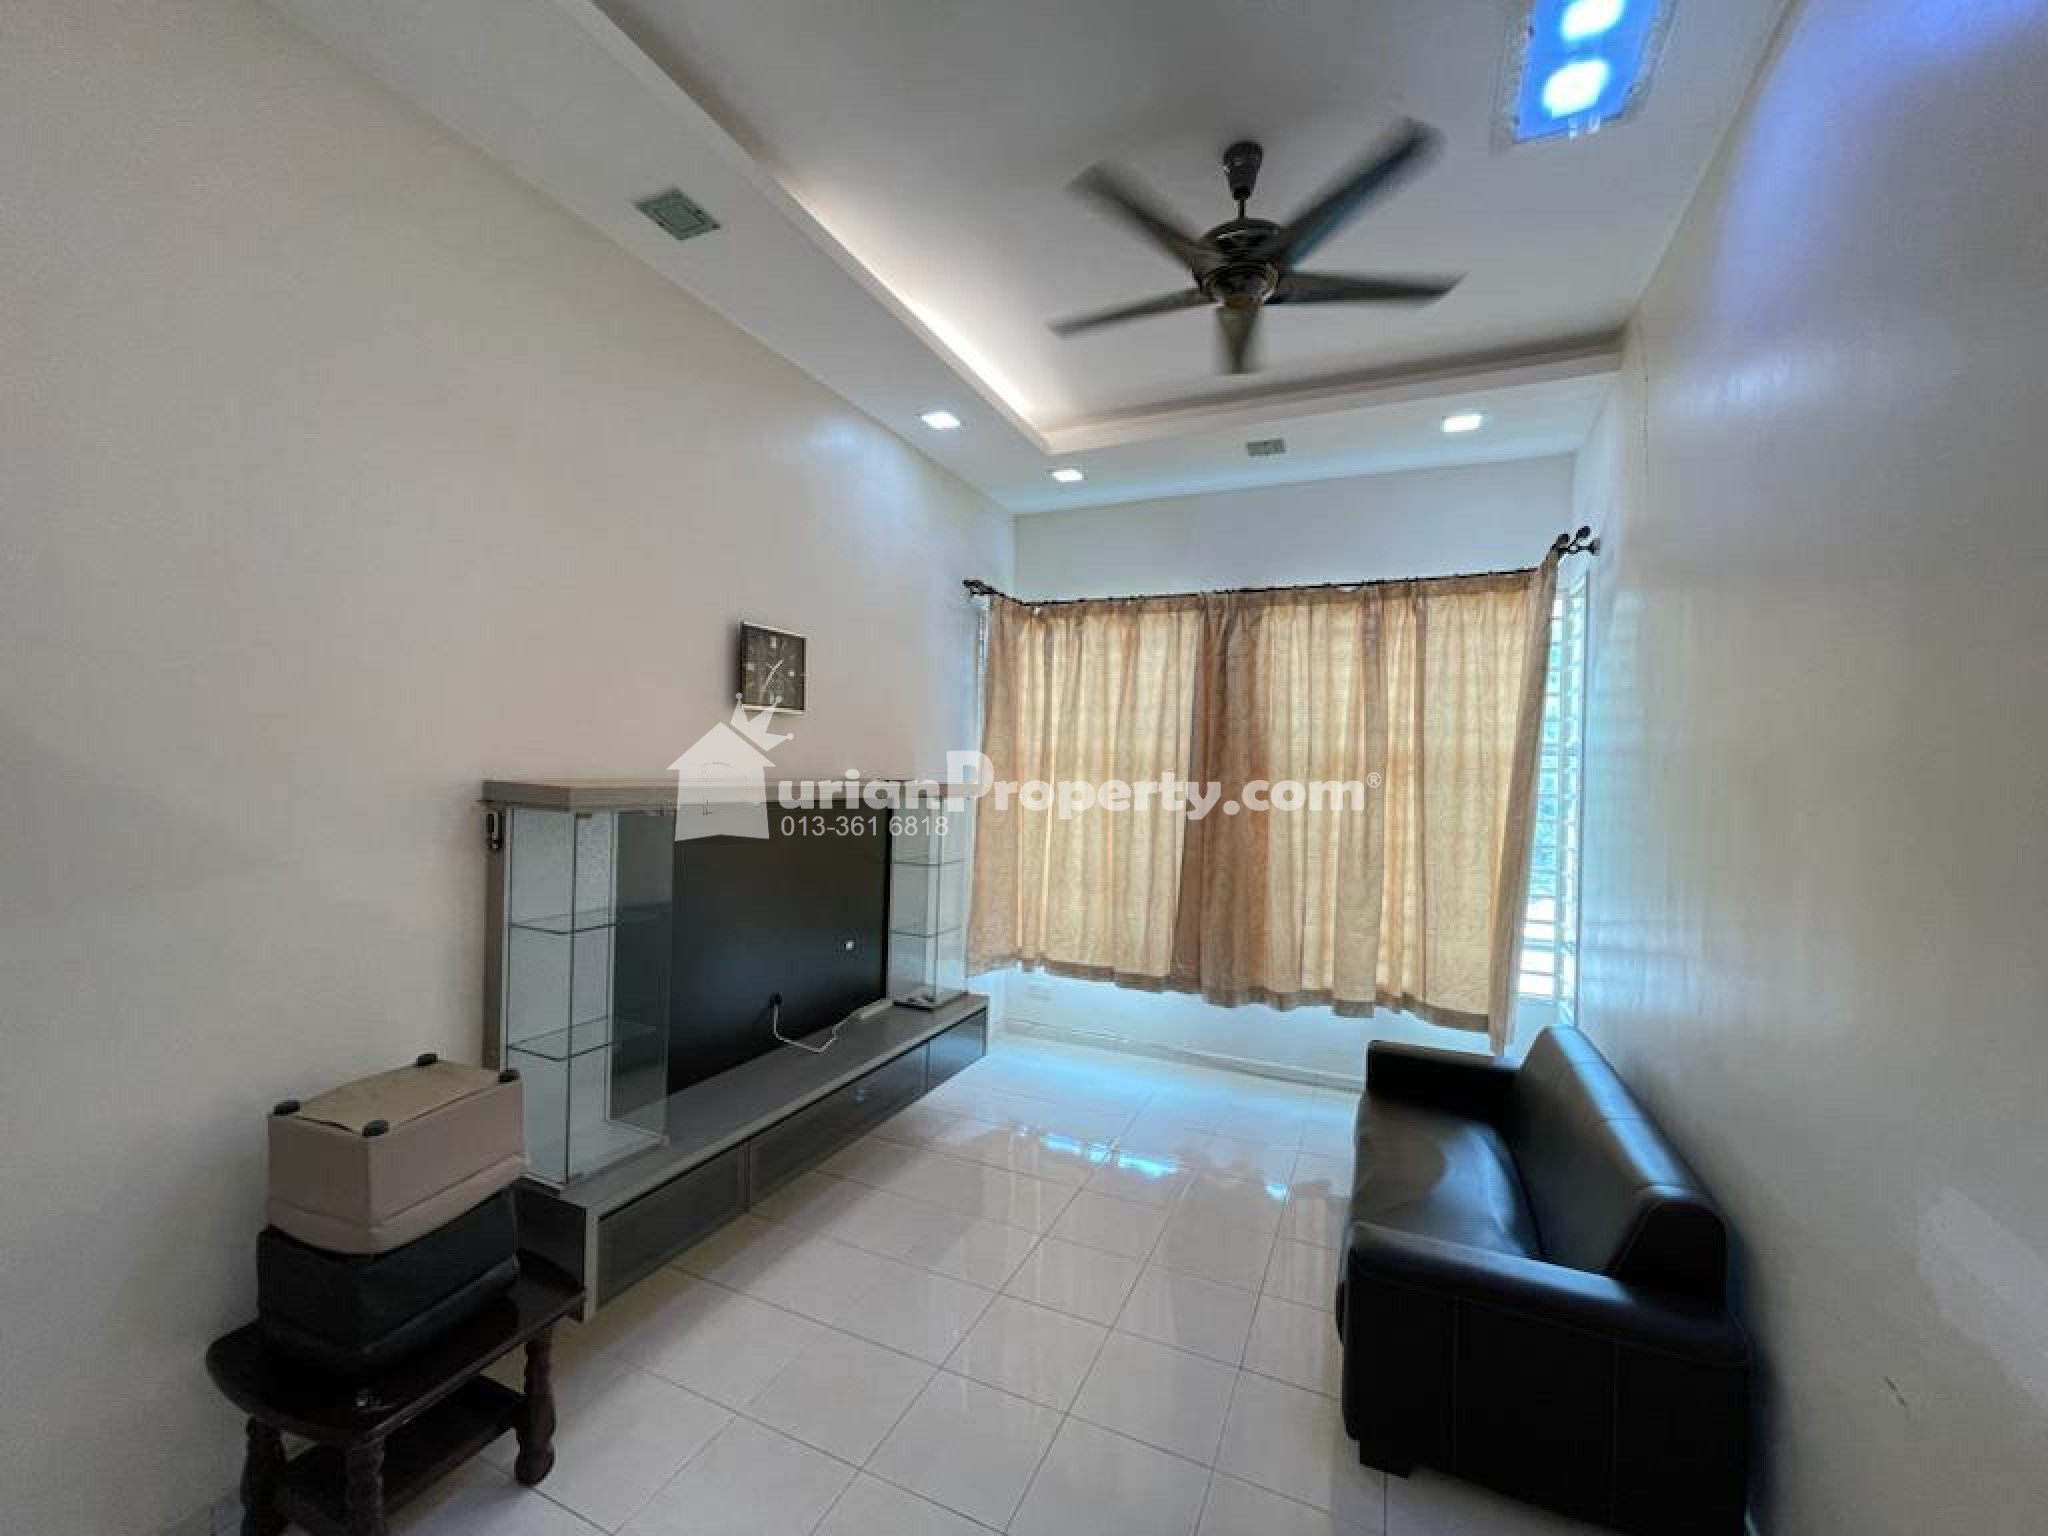 Condo For Rent at Sierra Residency